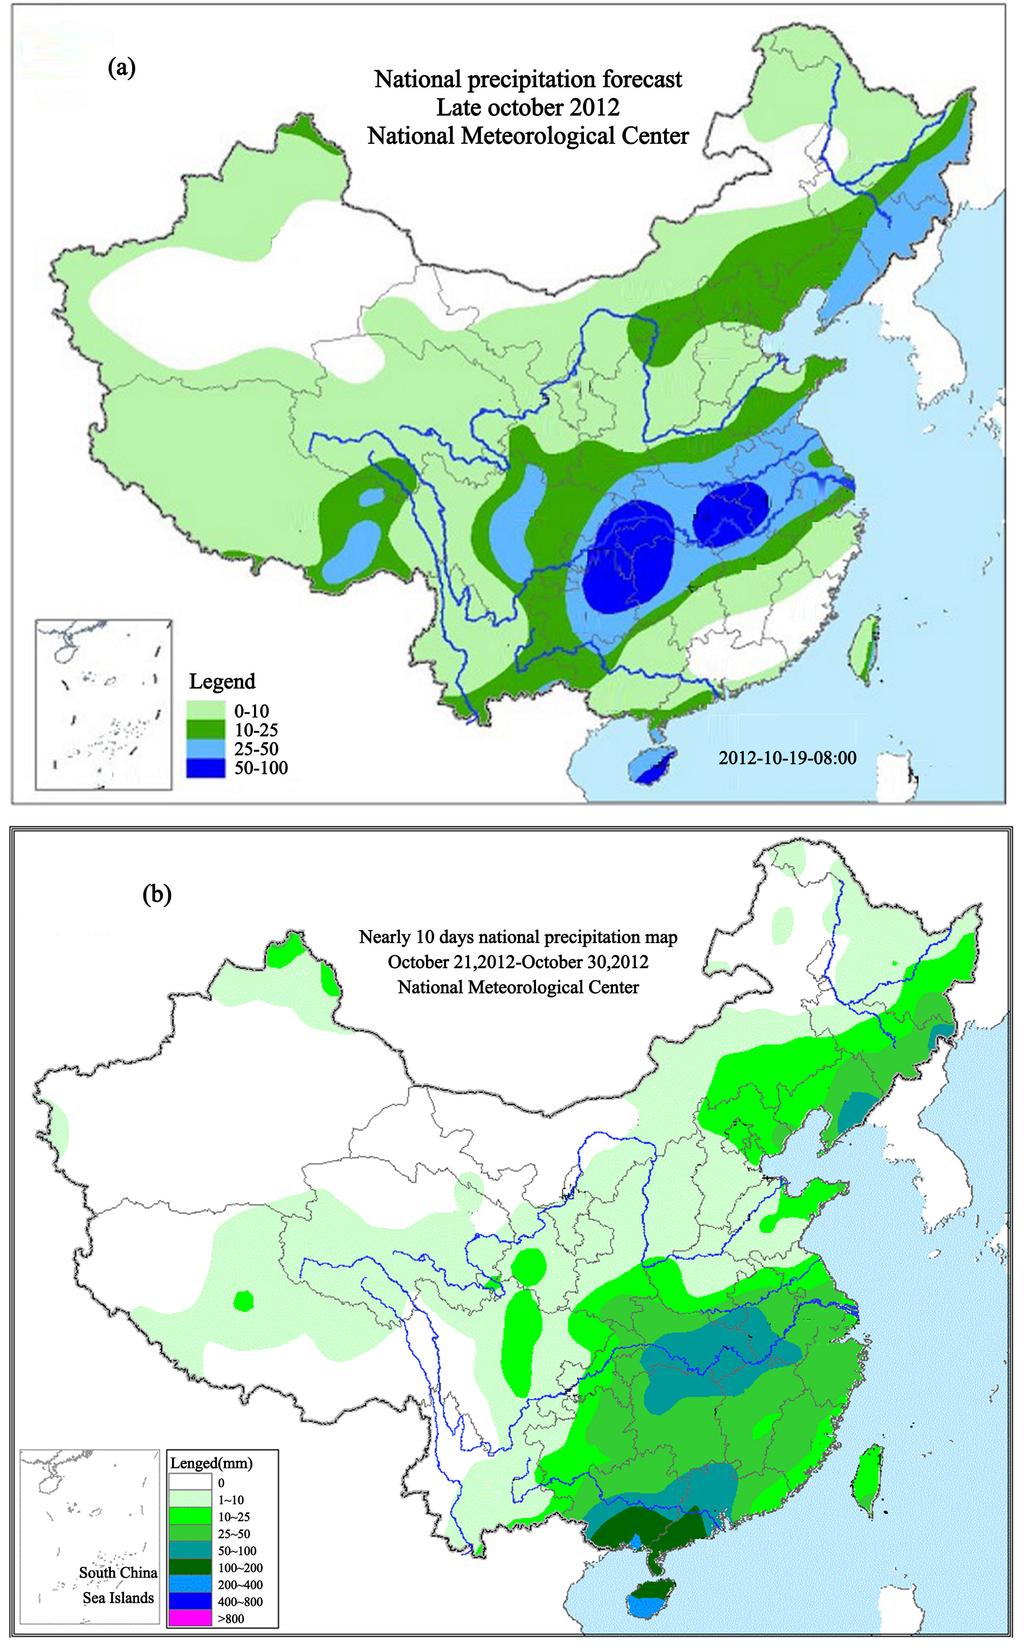 R. Yao et al. Figure 6. Forecast (a) and actual (b) precipitation in late October (unit: mm).